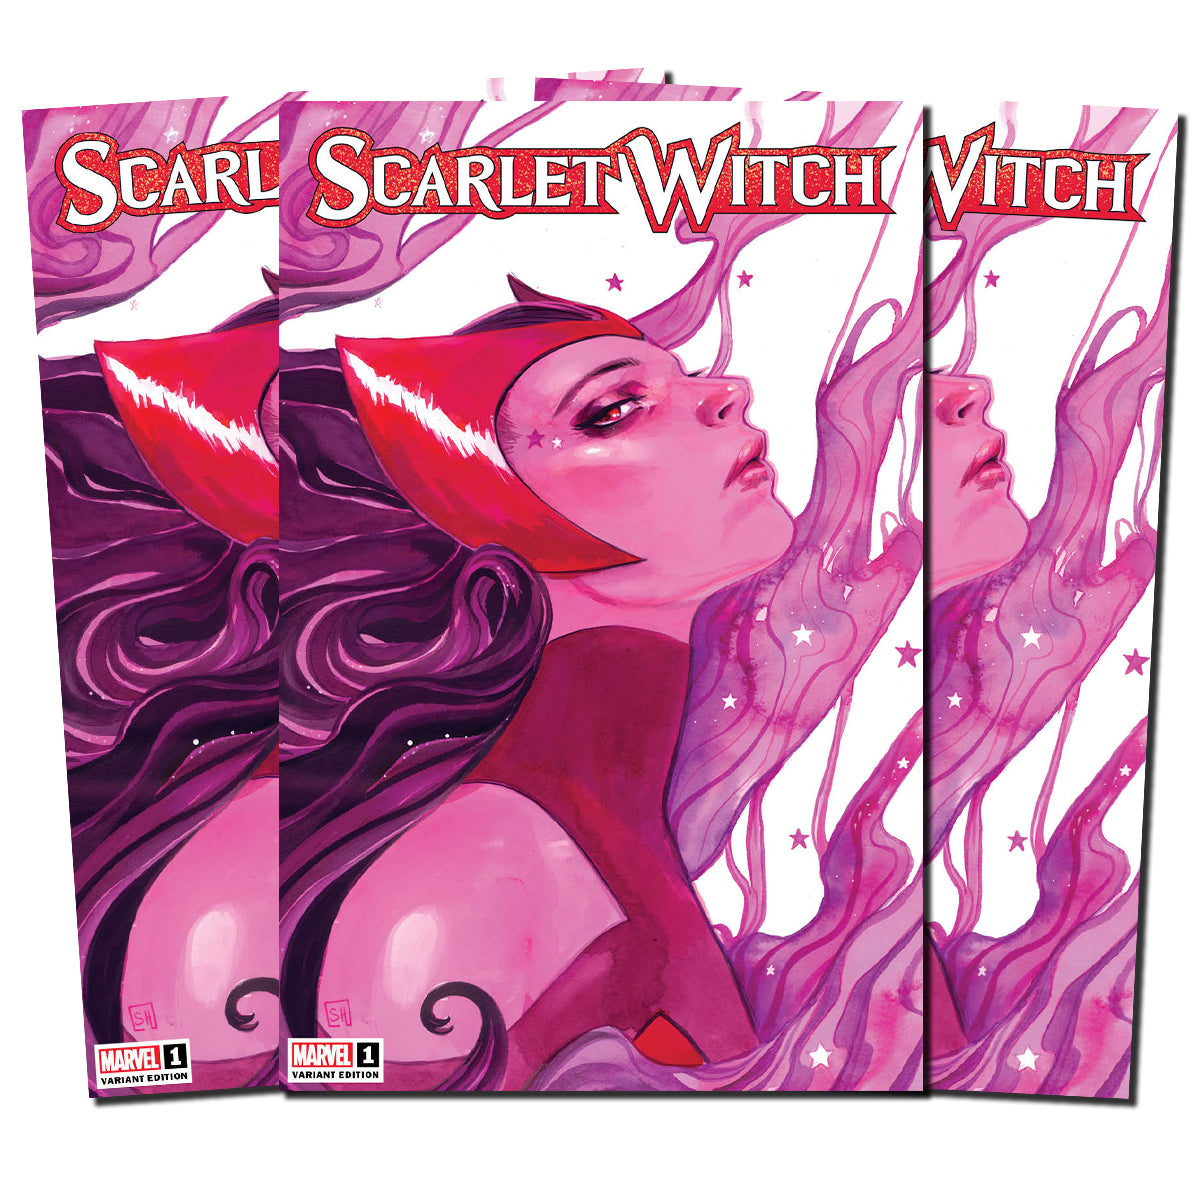 Scarlet Witch #1 Stephanie Hans Cover Limited Edition 1,500 Exclusive 3 Pack FINALSALE